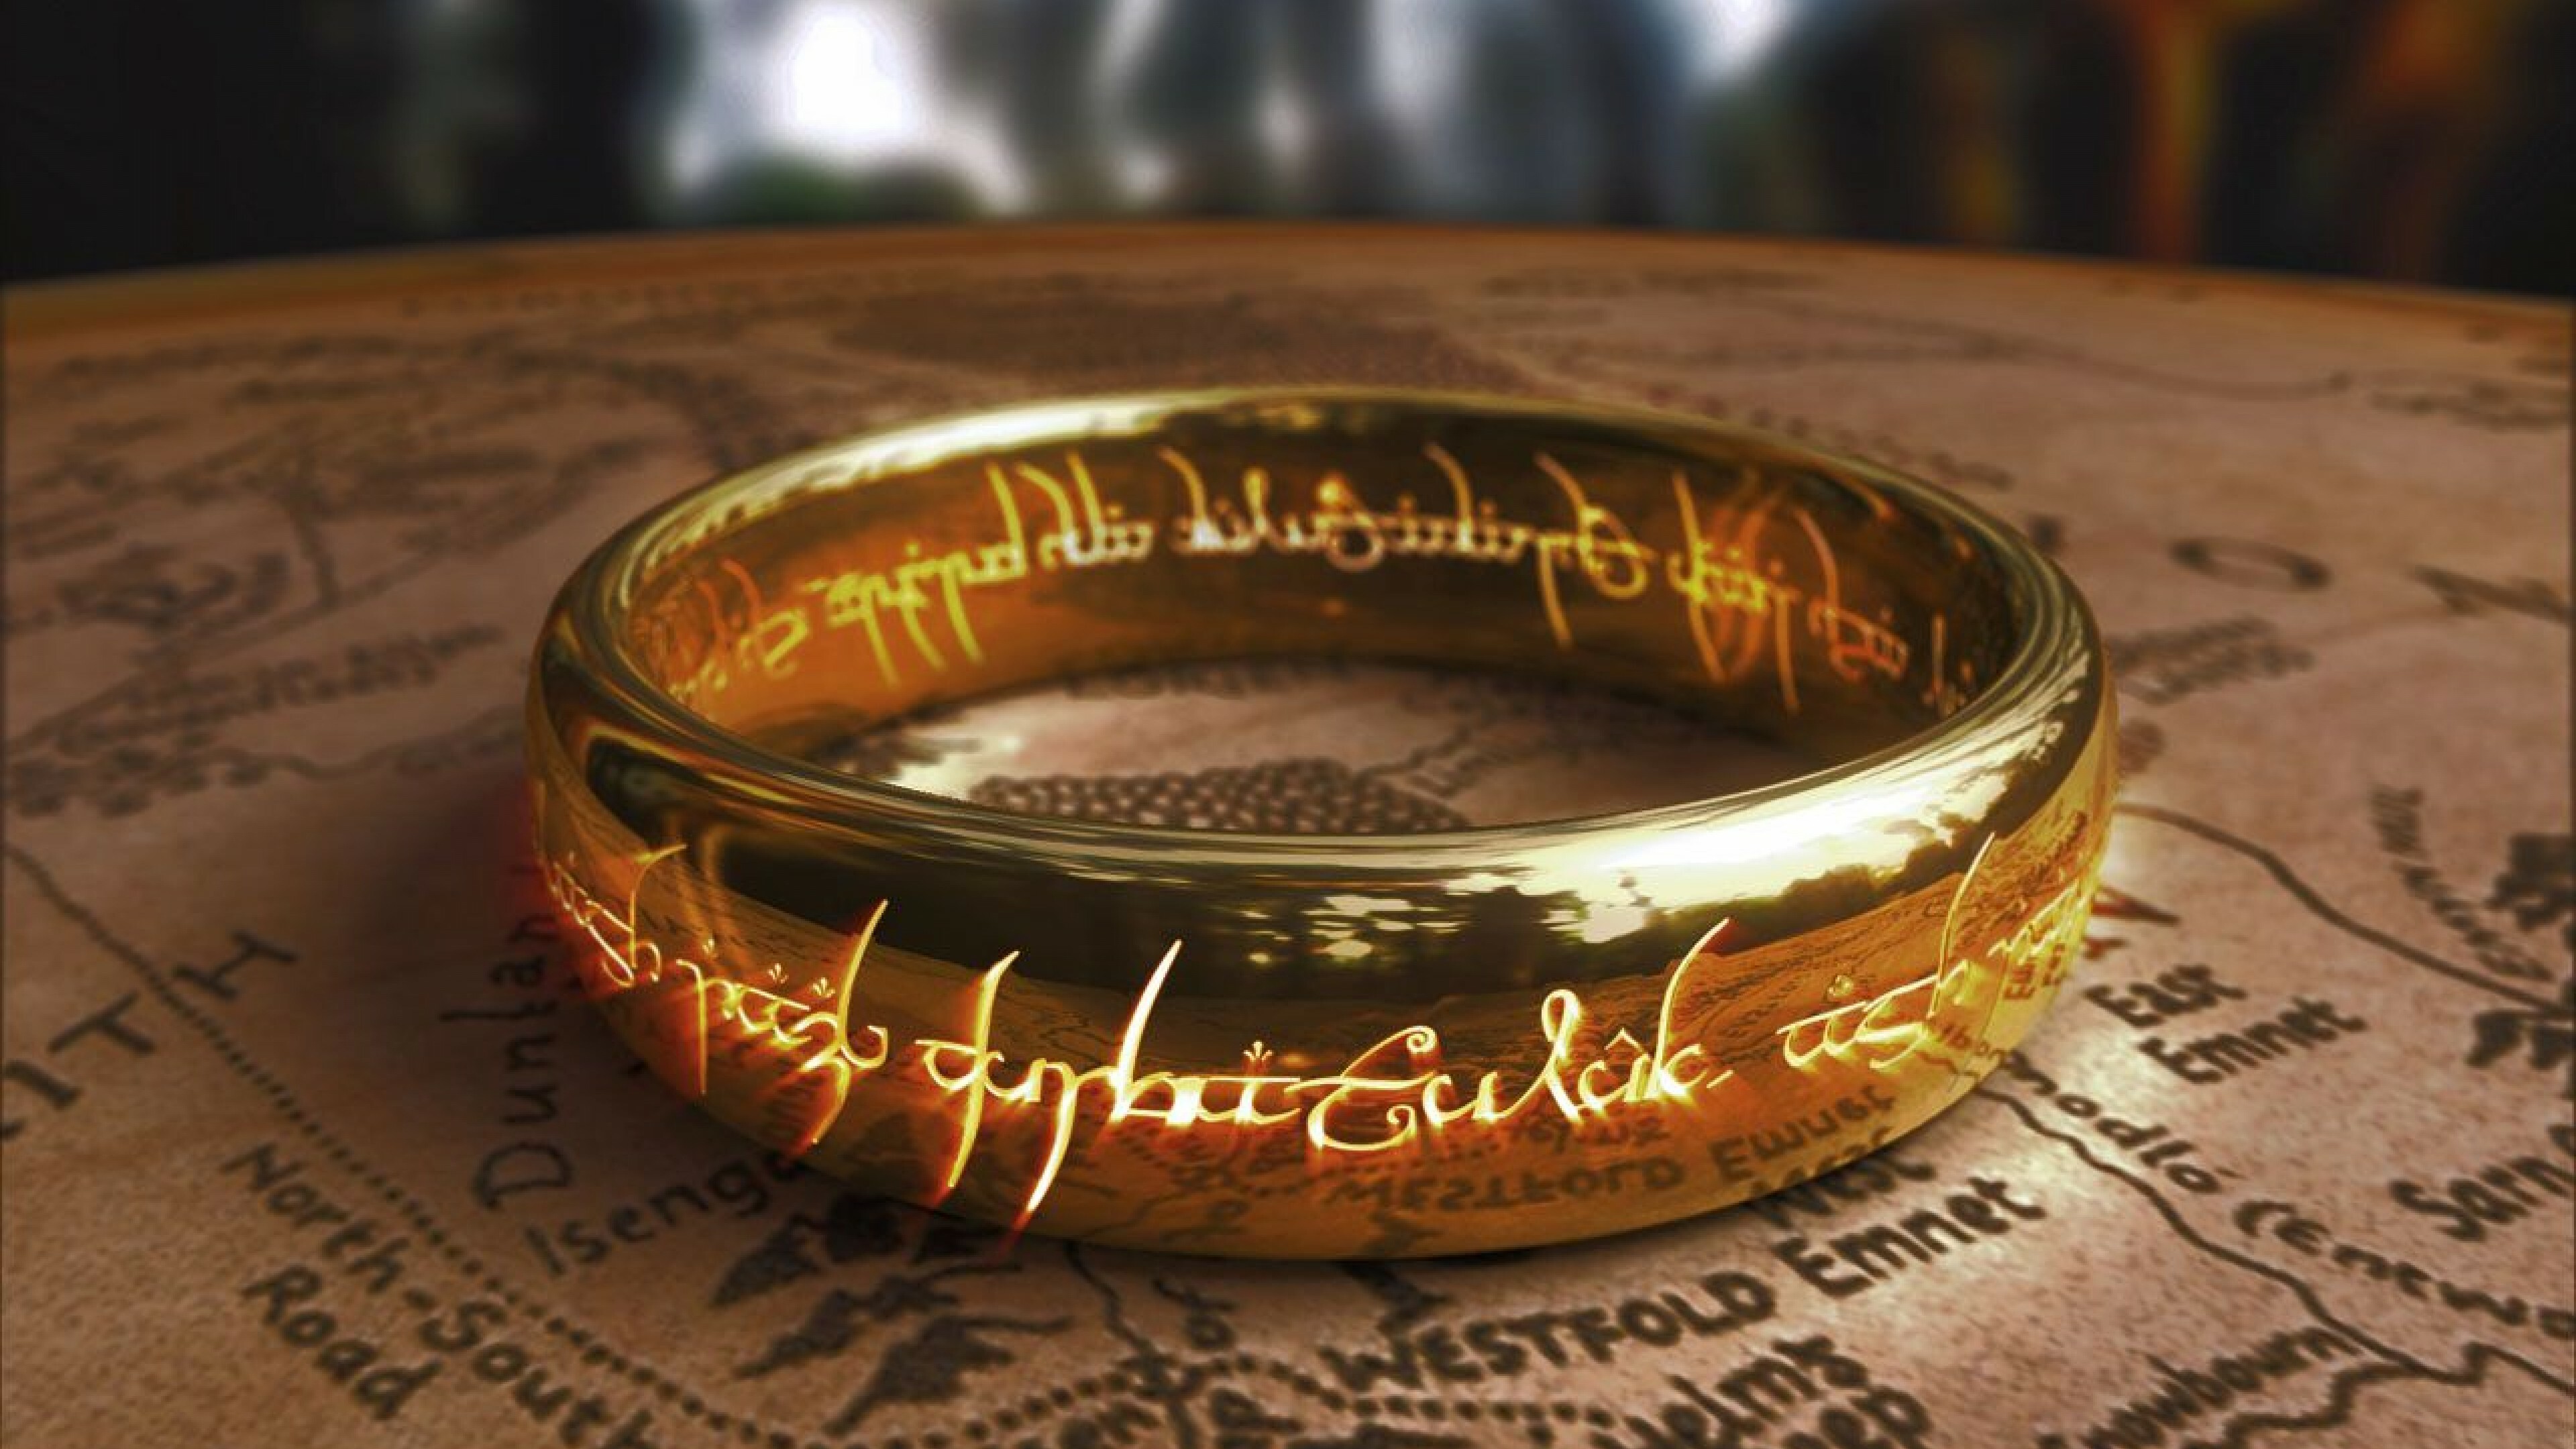 The Lord of the Rings: The One Ring, A central plot element in J. R. R. Tolkien's LOTR. 3840x2160 4K Background.